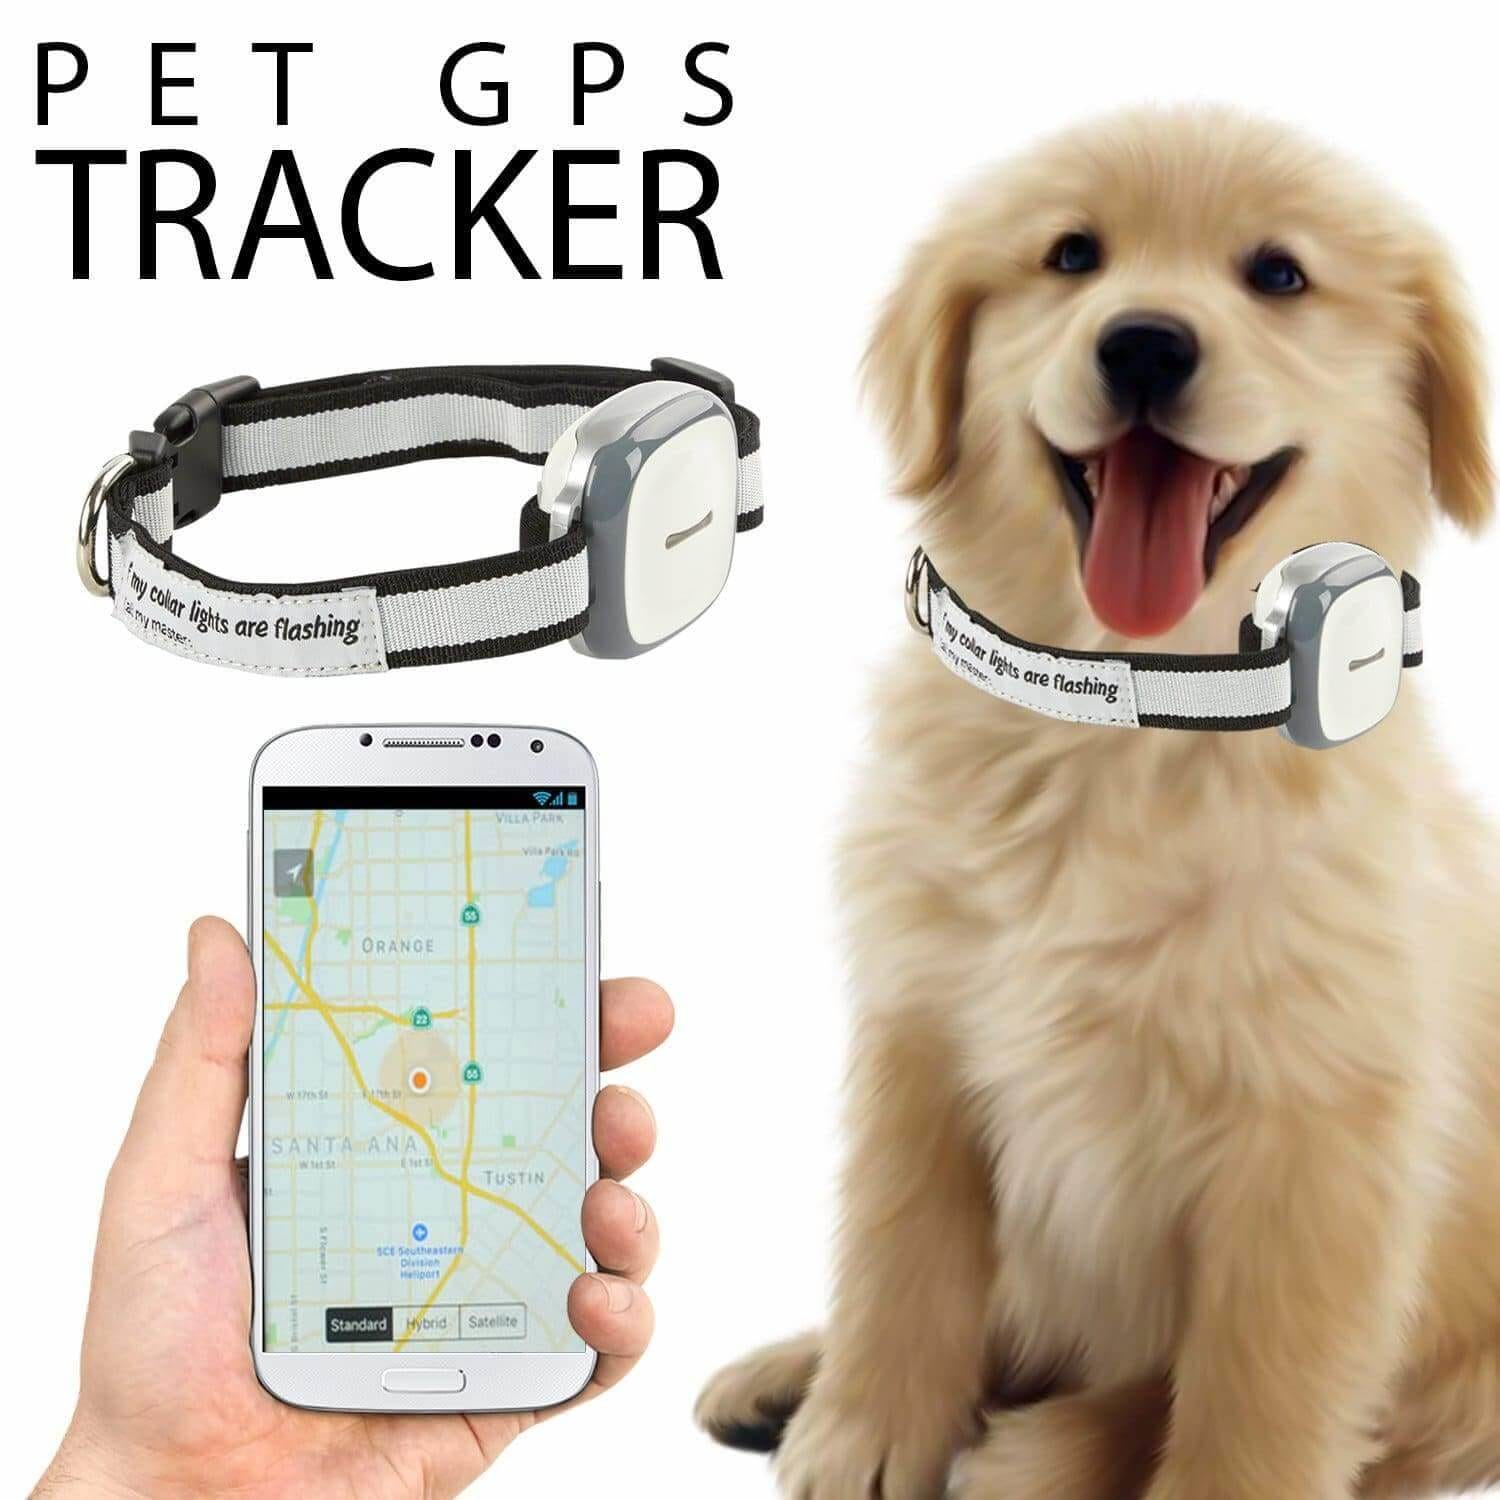 Talis-us Pet GPS Tracker Featured in Pet Life Today’s “Best GPS Cat Trackers & Collars”